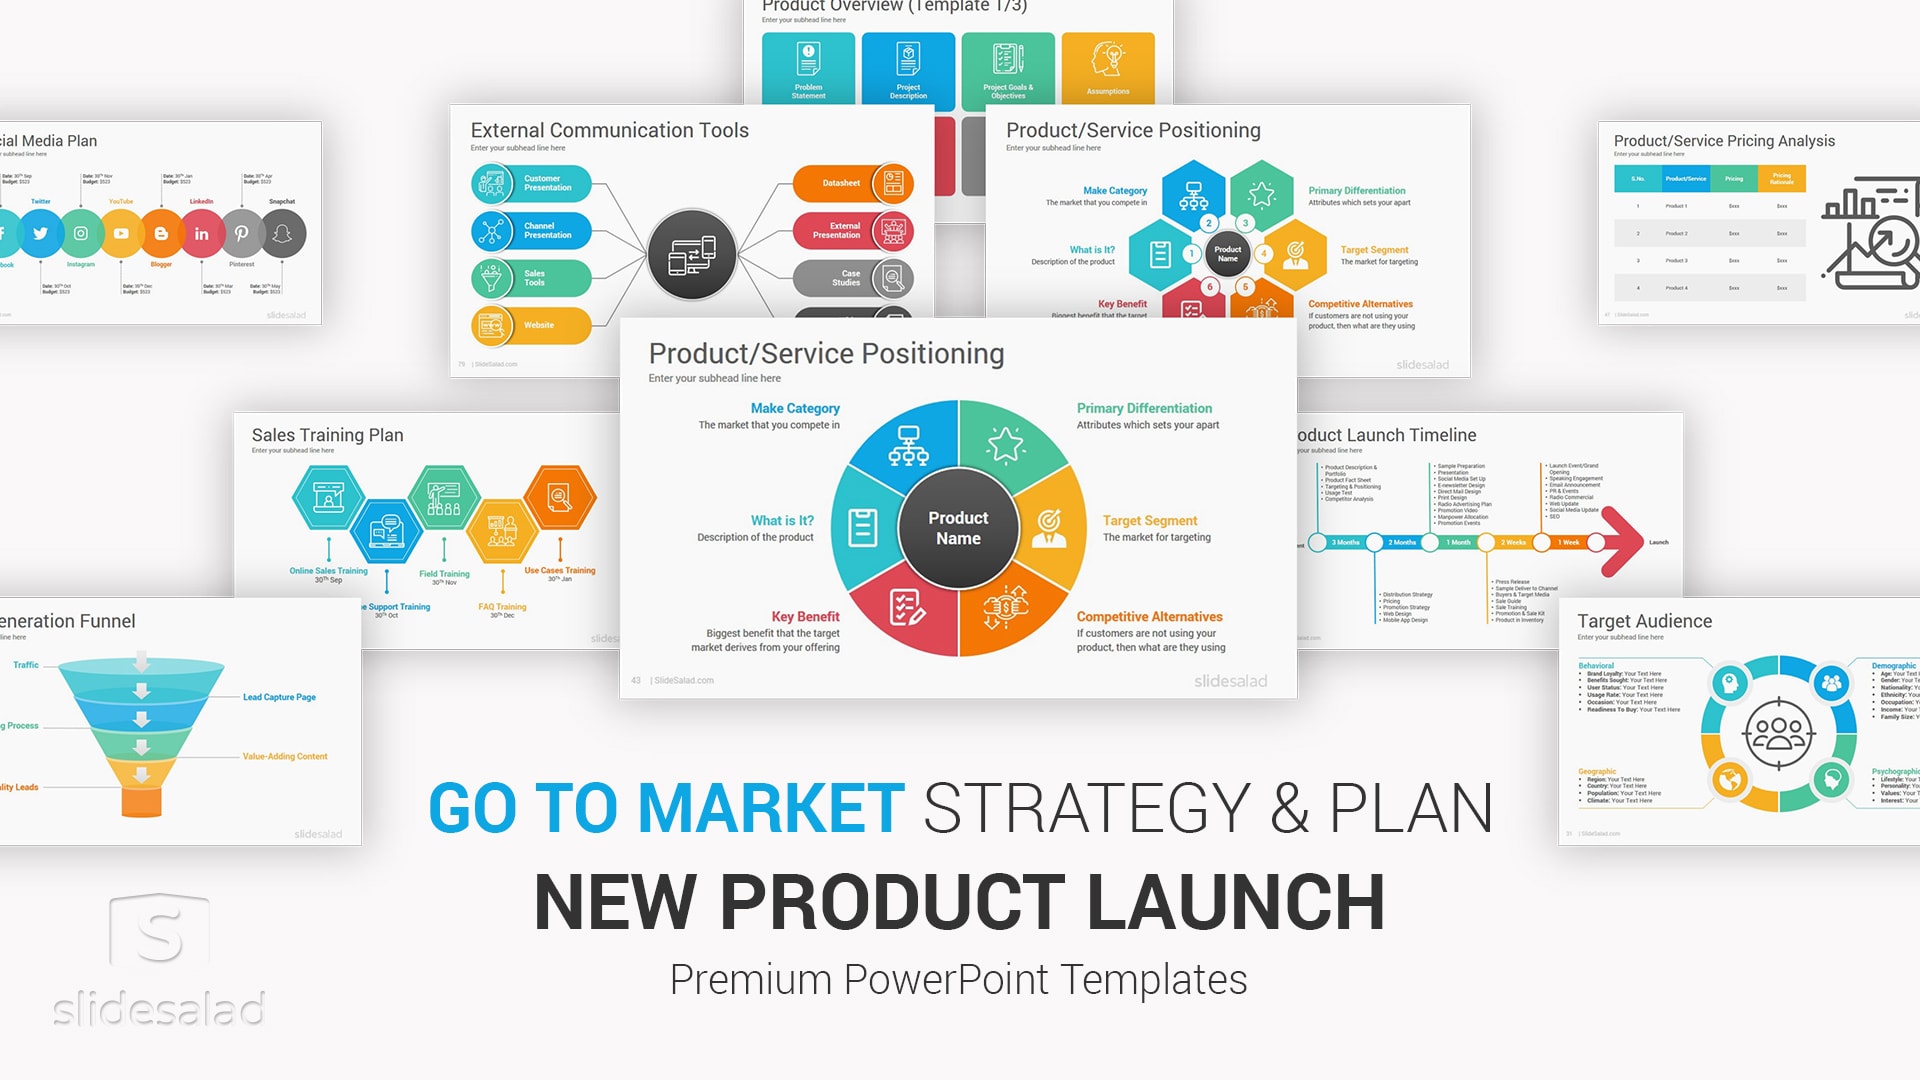 New Product Launch Go To Market Plan and Strategy PowerPoint Template - Premium Sales PPT Template